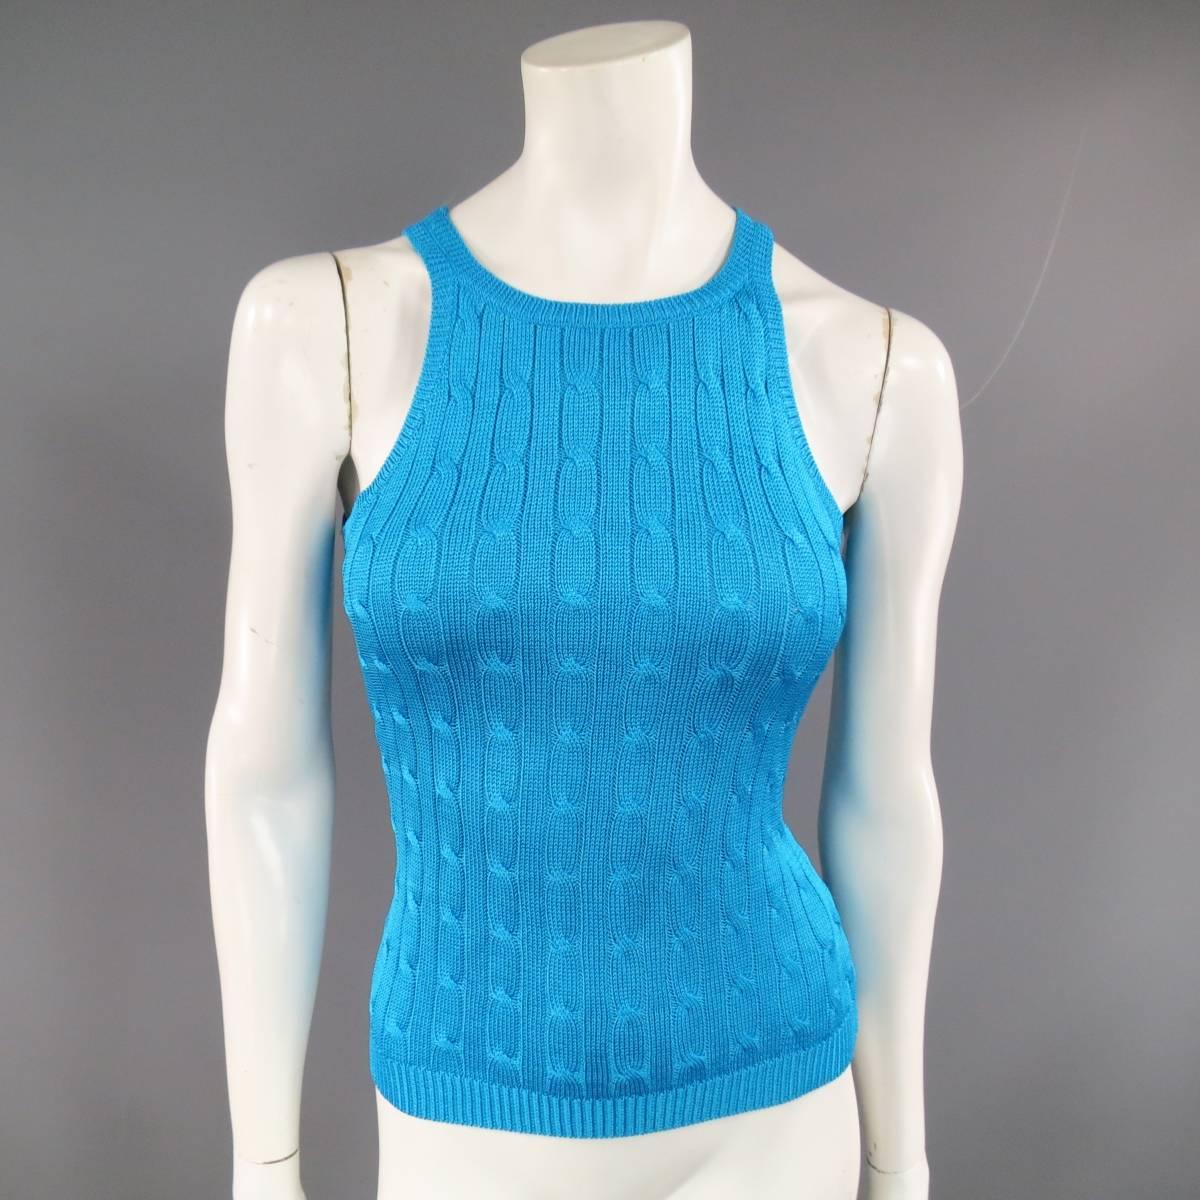 This RALPH LAUREN BLACK LABEL sweater set comes in shiny metallic turquoise blue silk cable knit and includes a cardigan and matching sleeveless top.

Excellent Pre-Owned Condition.
Marked: S

Measurements:

-Top-
Shoulder:  10 in.
Bust: 32